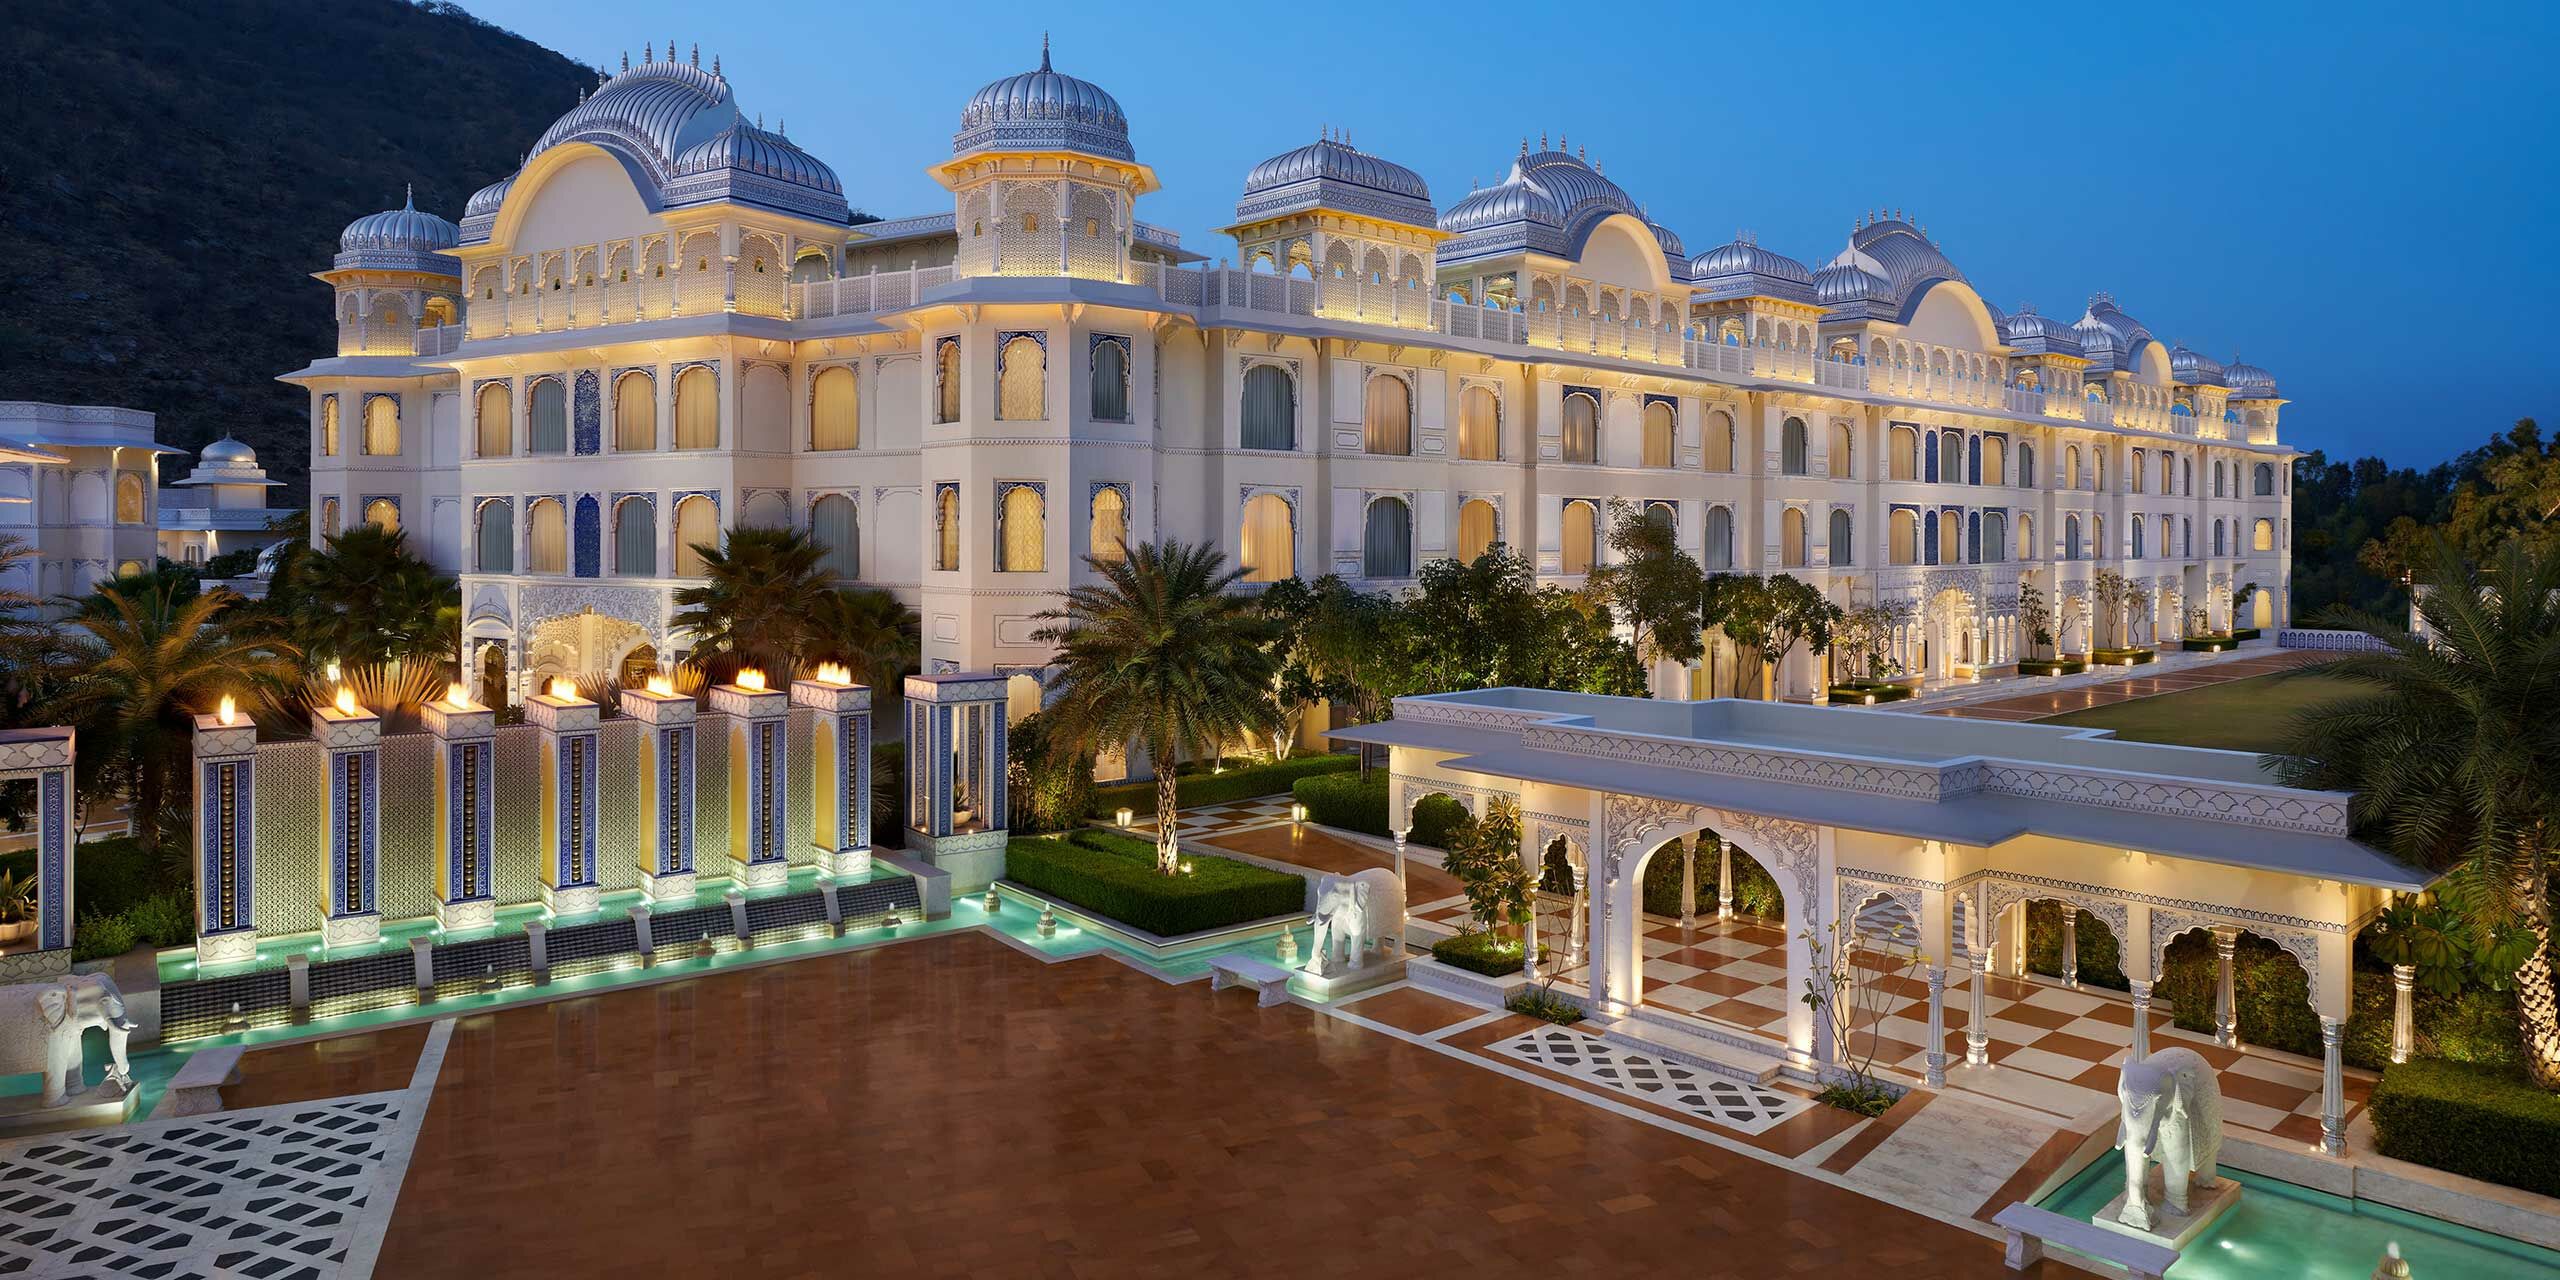 Why Jaipur Has Become A Hot Destination For Global Luxury Hotels